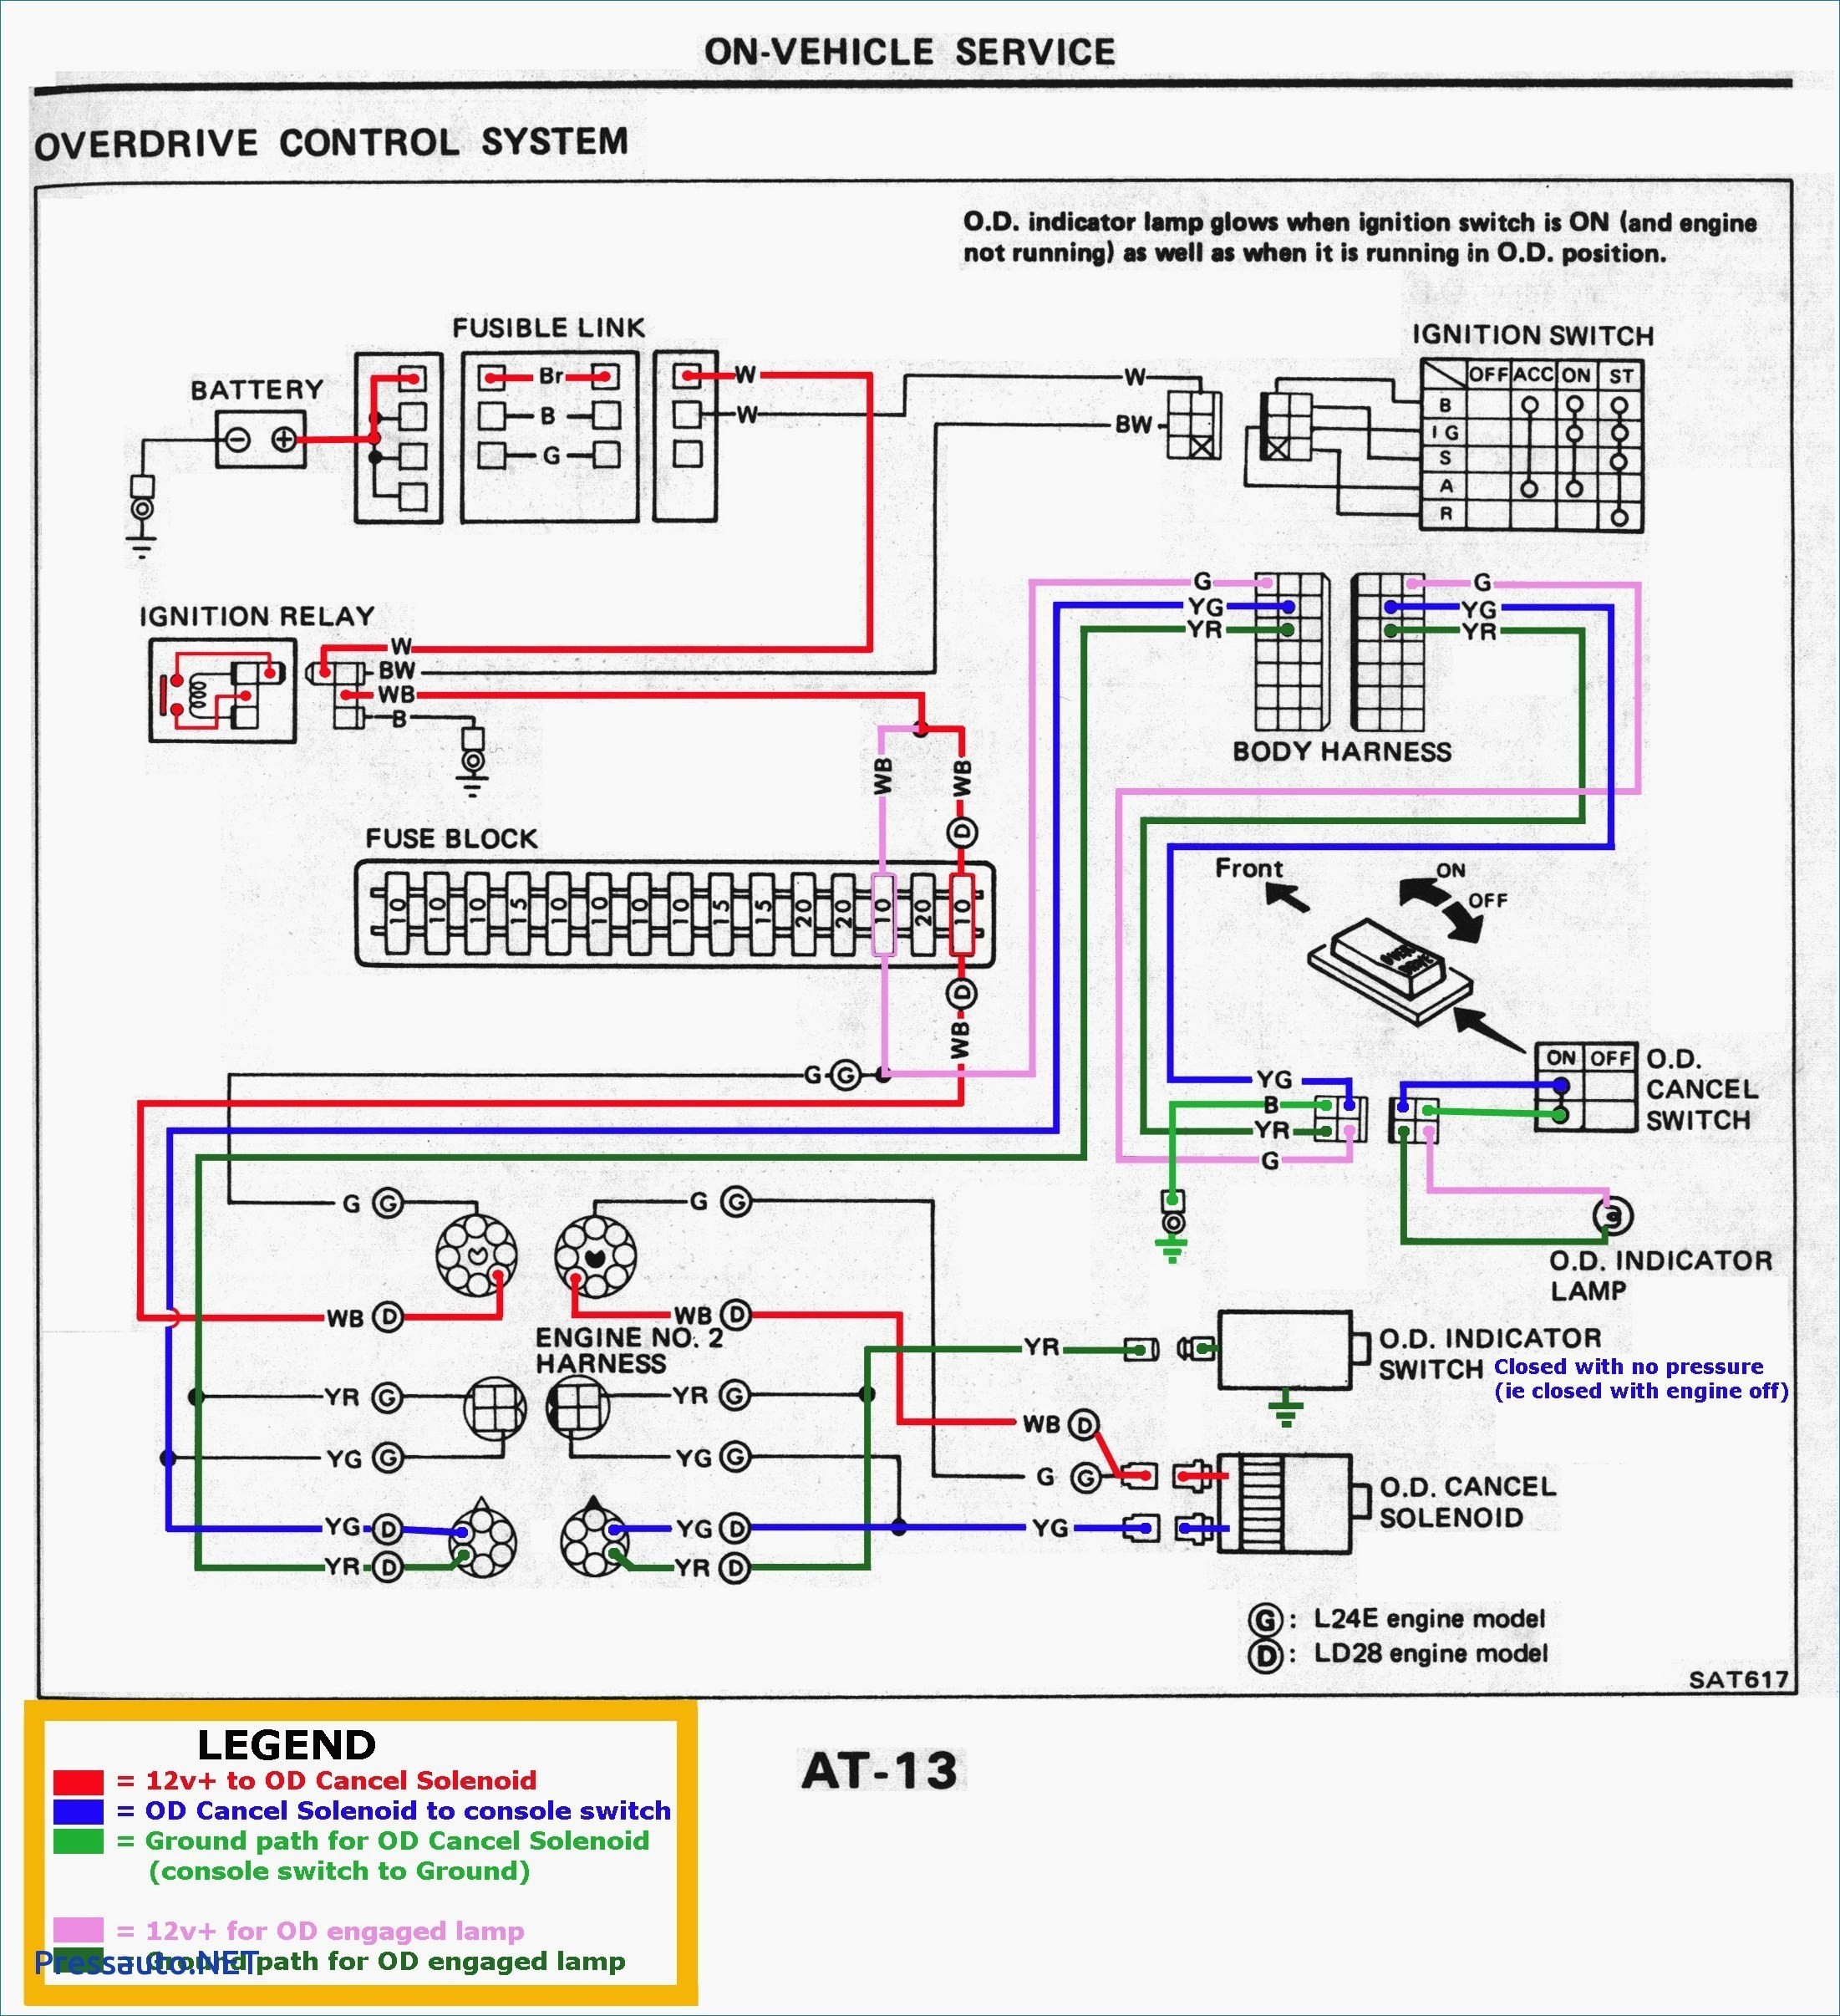 Wiring Diagram Color Coding By Jorge Menchu New Wiring Diagram Color Codes Unique